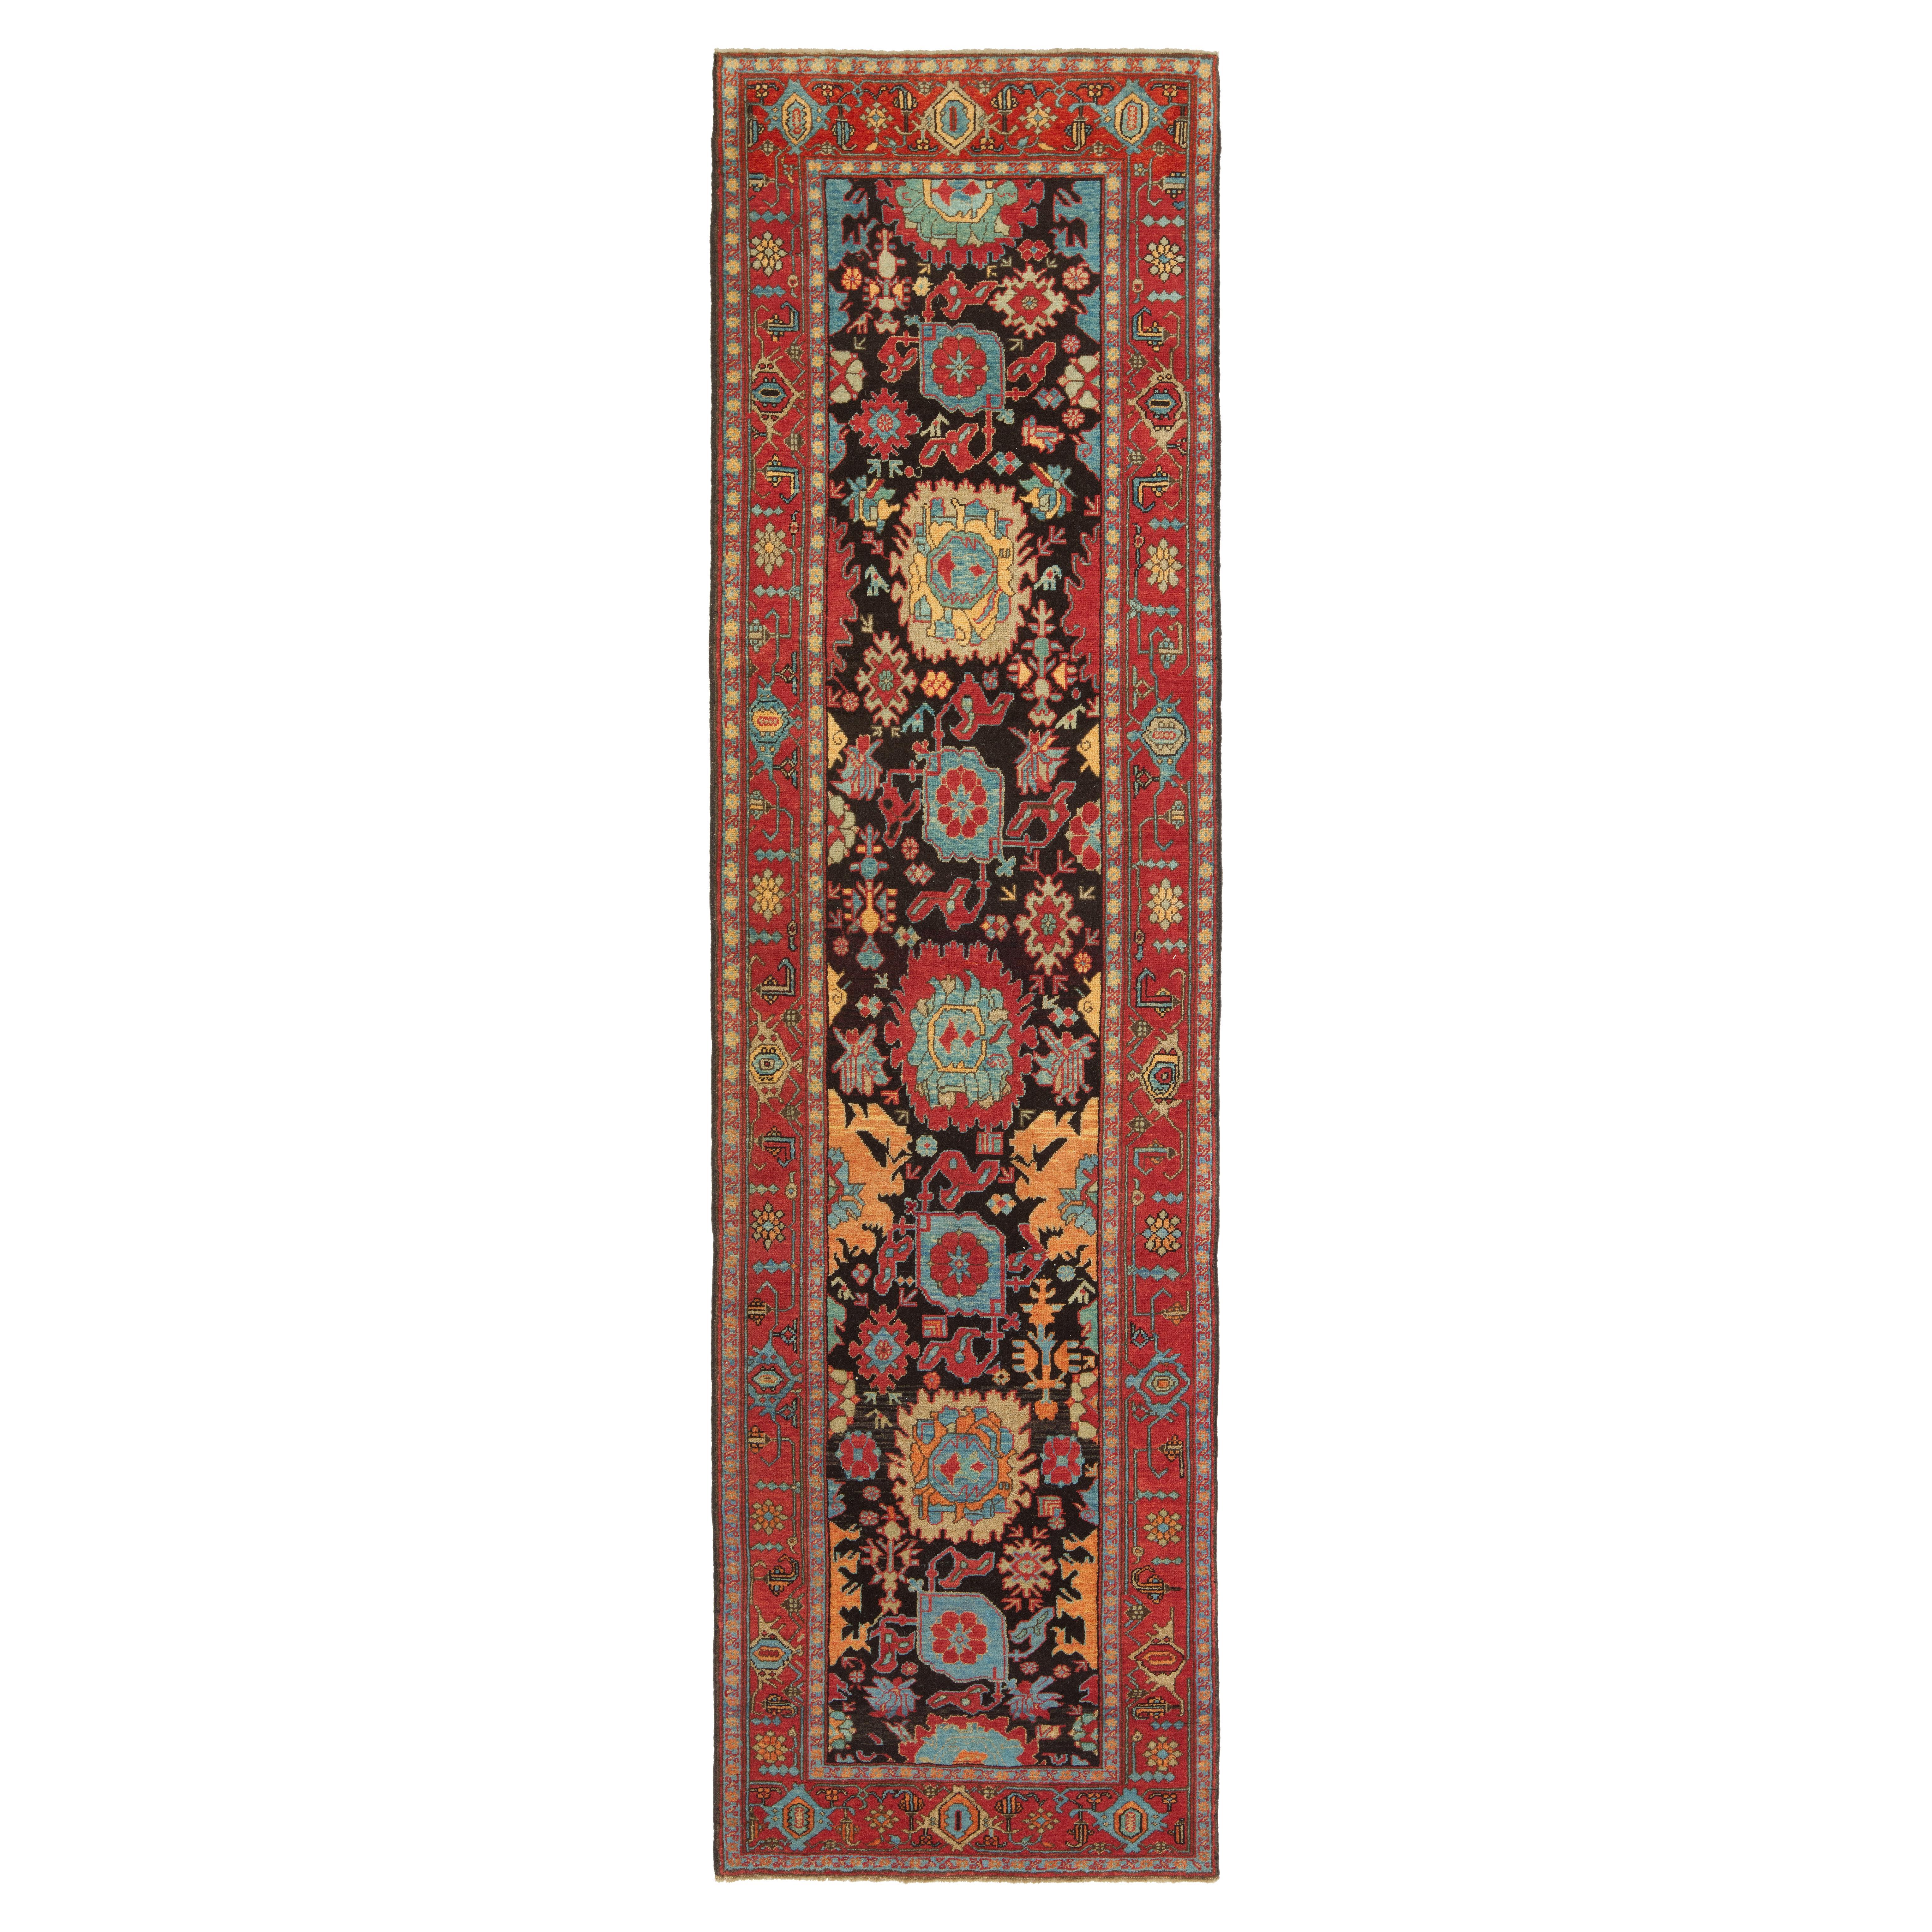 Ararat Rugs Palmettes and Flowers Lattice Rug Revival Carpet, Natural Dyed